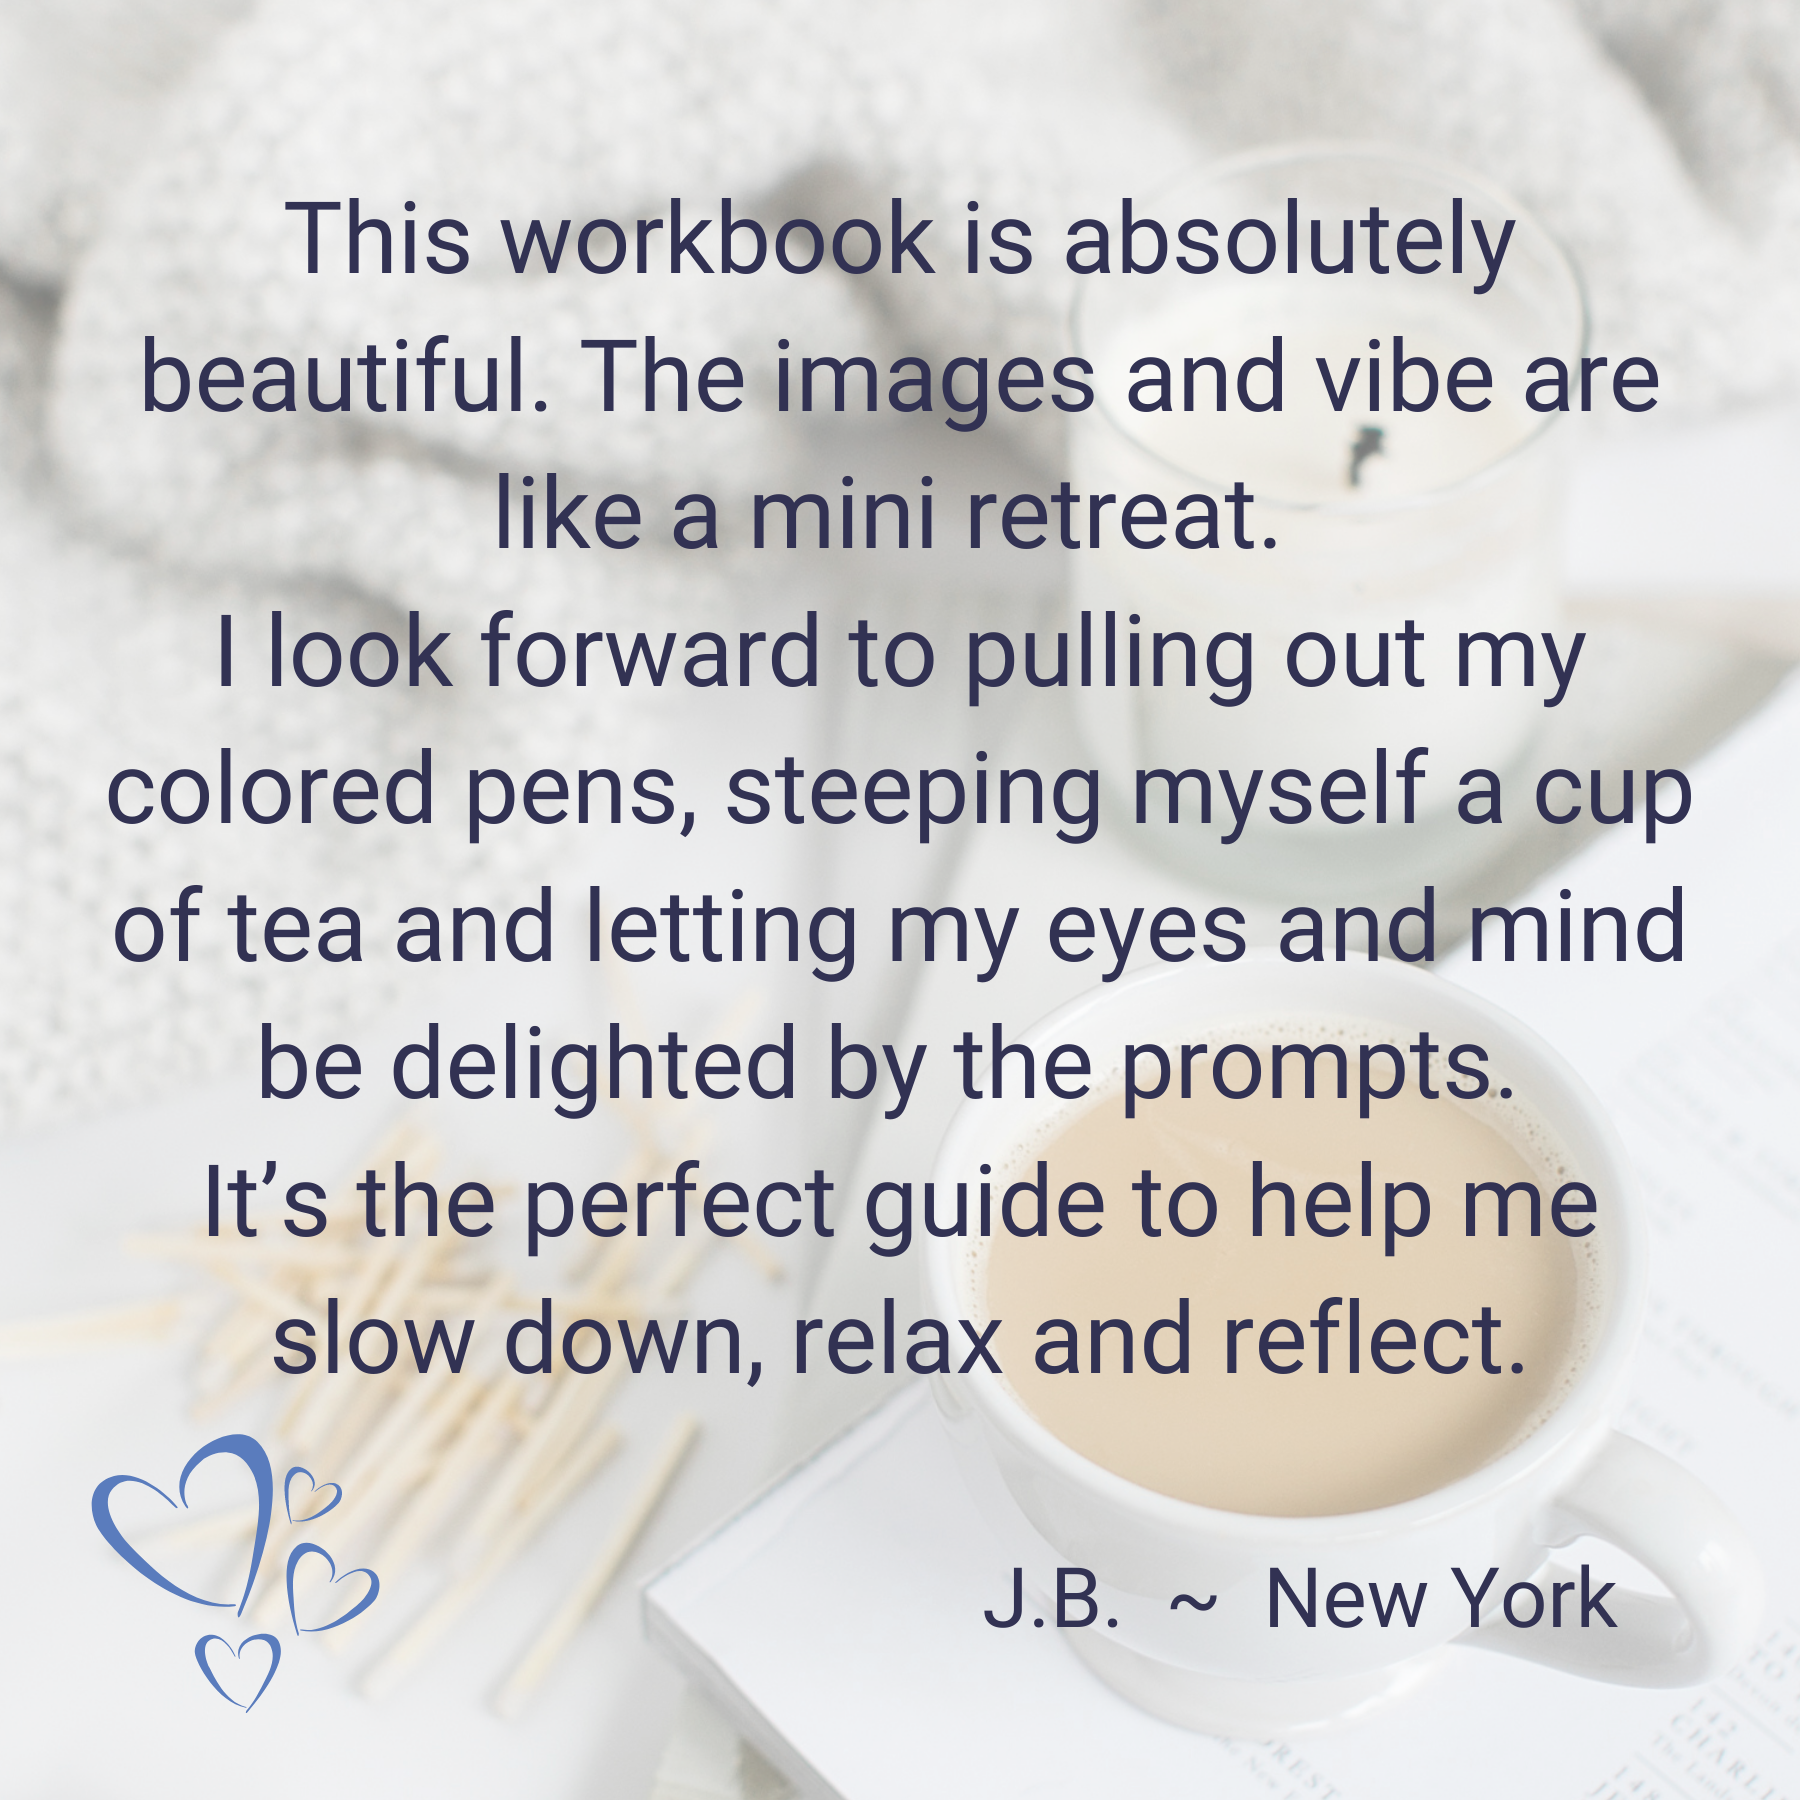 Testimonial: This workbook is absolutely beautiful. The images and vibe are like a mini-retreat. I look forward to pulling out my colored pens, steeping myself a cup of tea, and letting my eyes and mind be delighted by the prompts. It's the perfect guide to help me slow down, relax, and reflect. J.B. - New York.